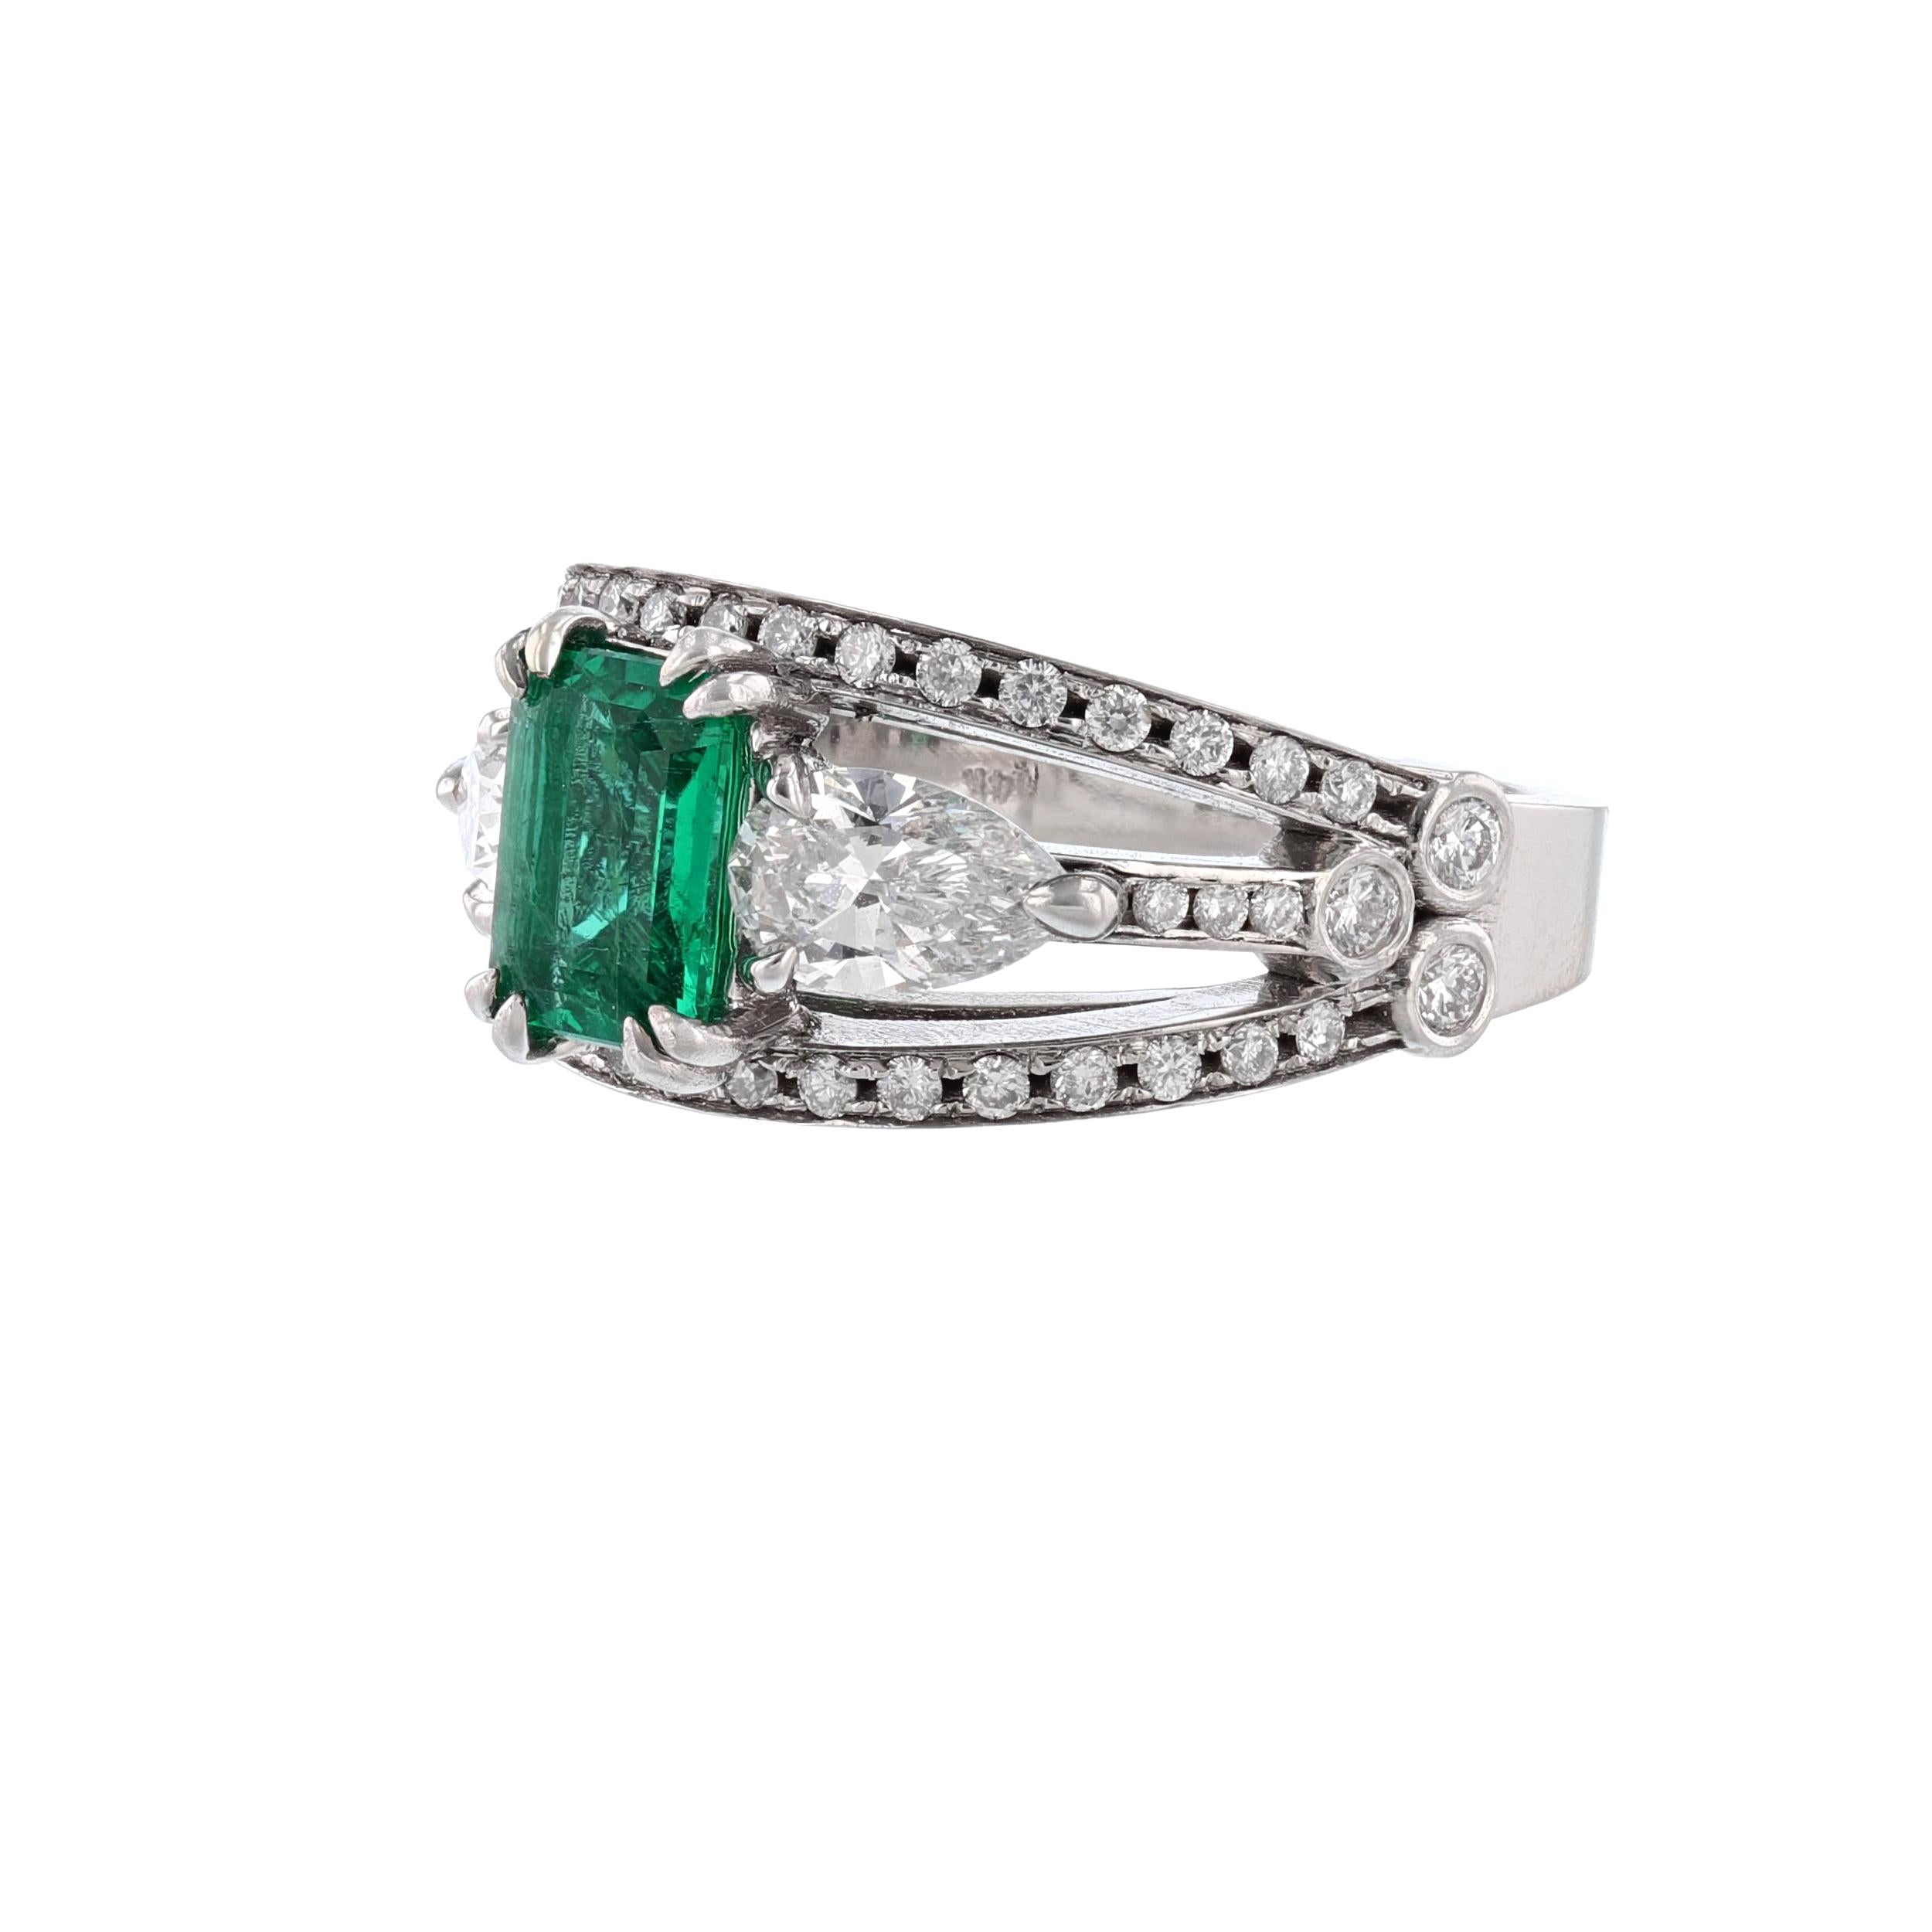 This ring is made in 14k white gold and features 1 octagonal cut, prong set beryl emerald weighing 1.10 carats. With a color grade (Green) and GIA Certificate number 2125281020. Also includes 2 pear shape, prong set diamonds, and 48 round cut, bezel